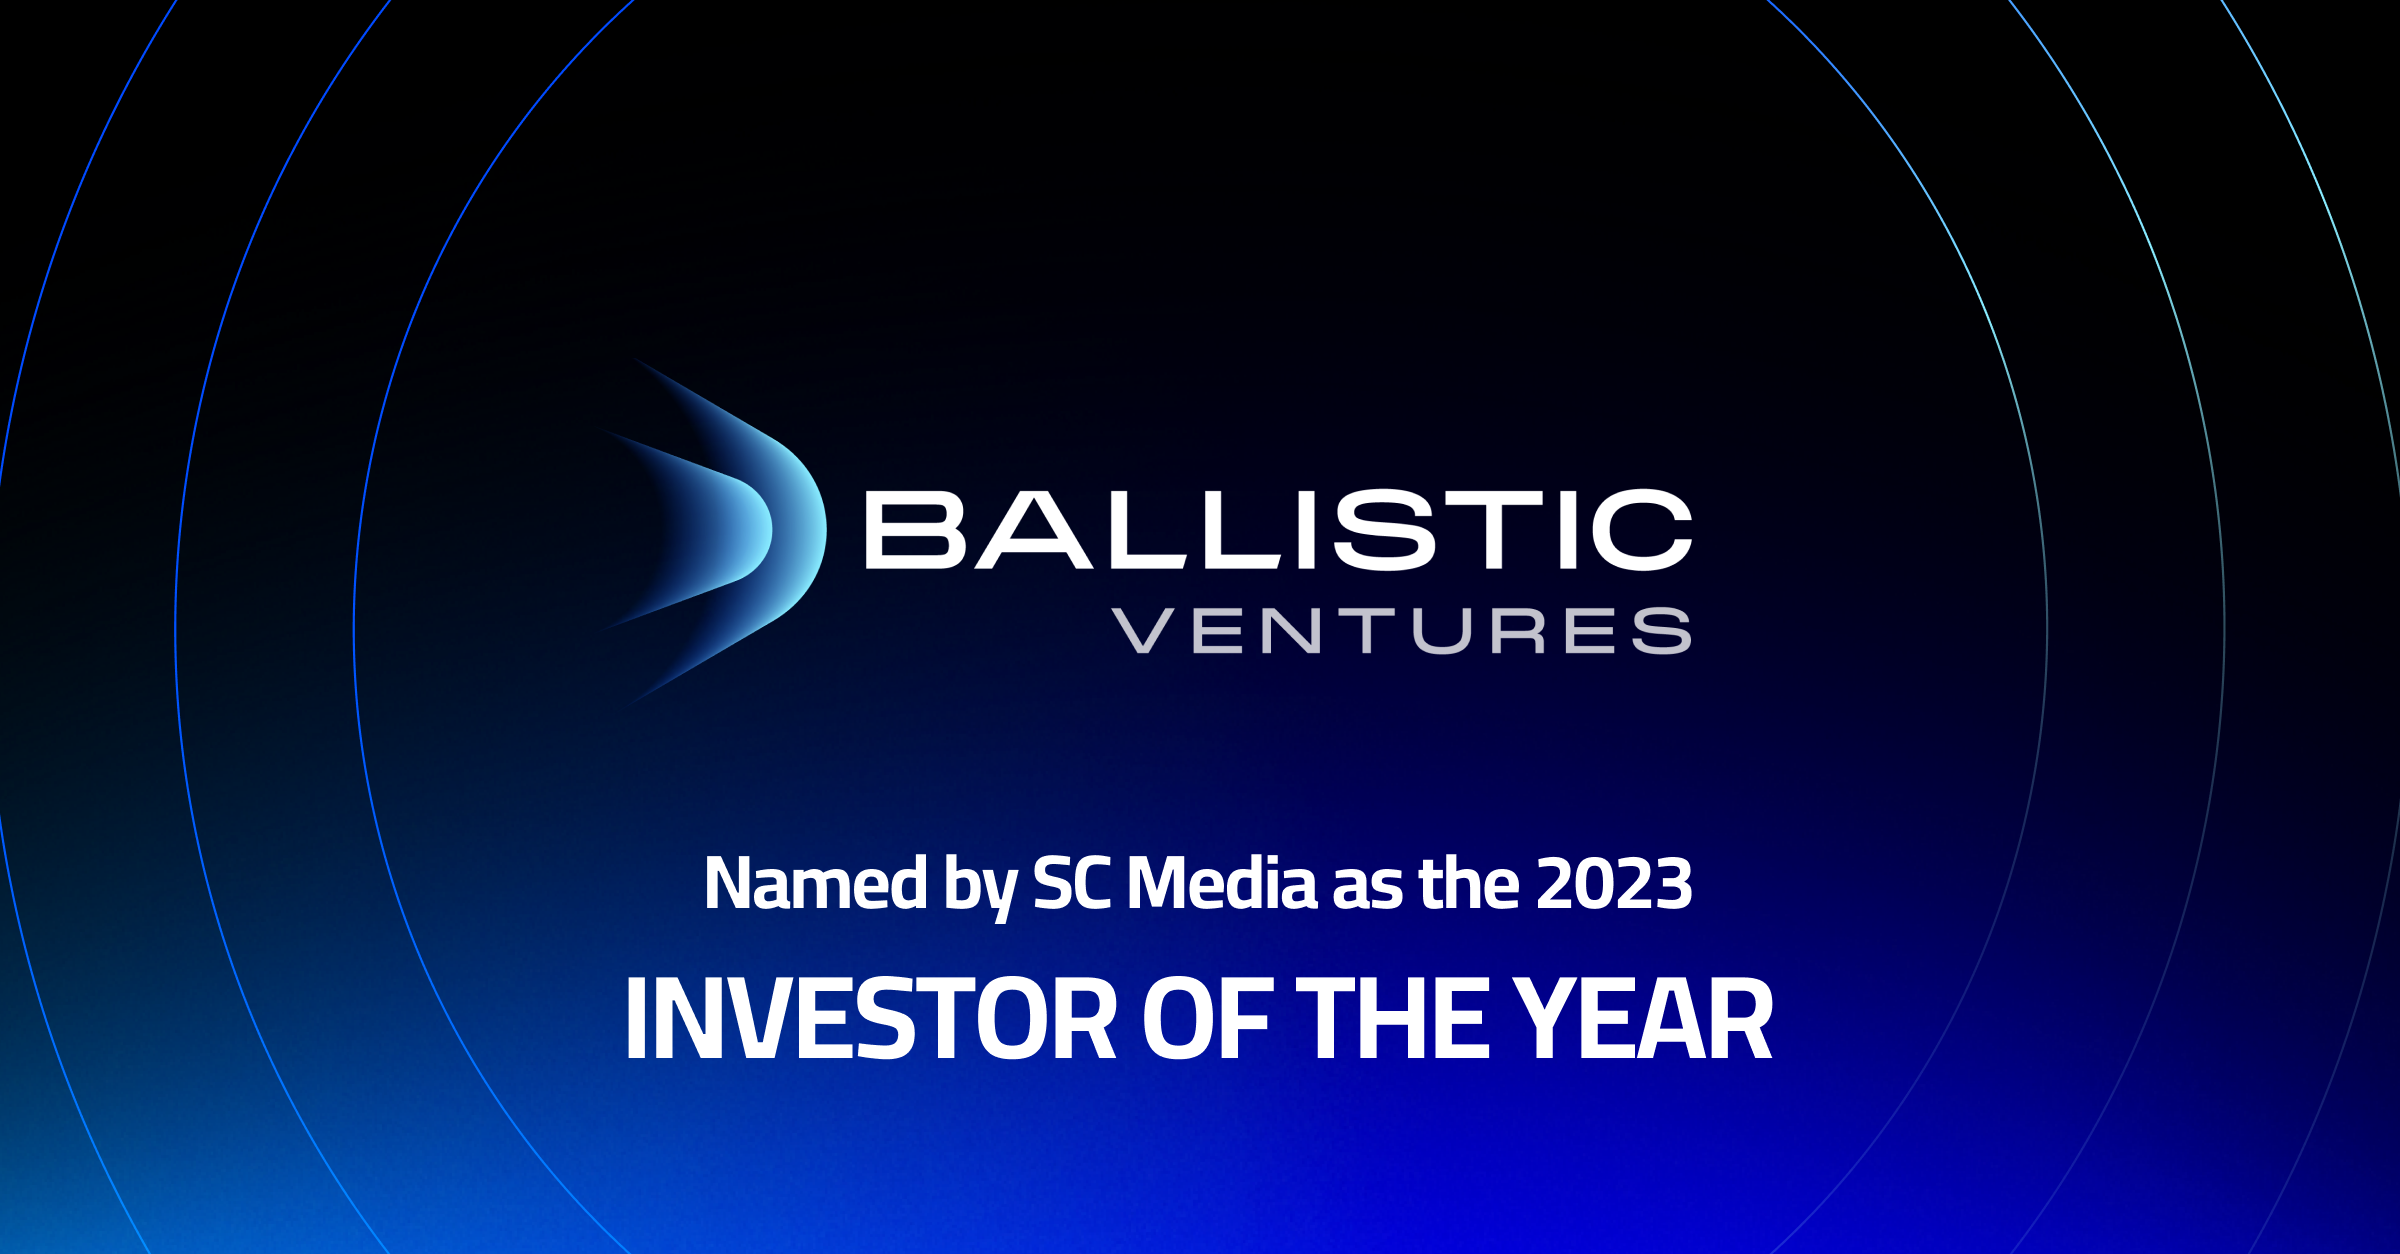 Ballistic Ventures Named Investor of the Year by SC Media